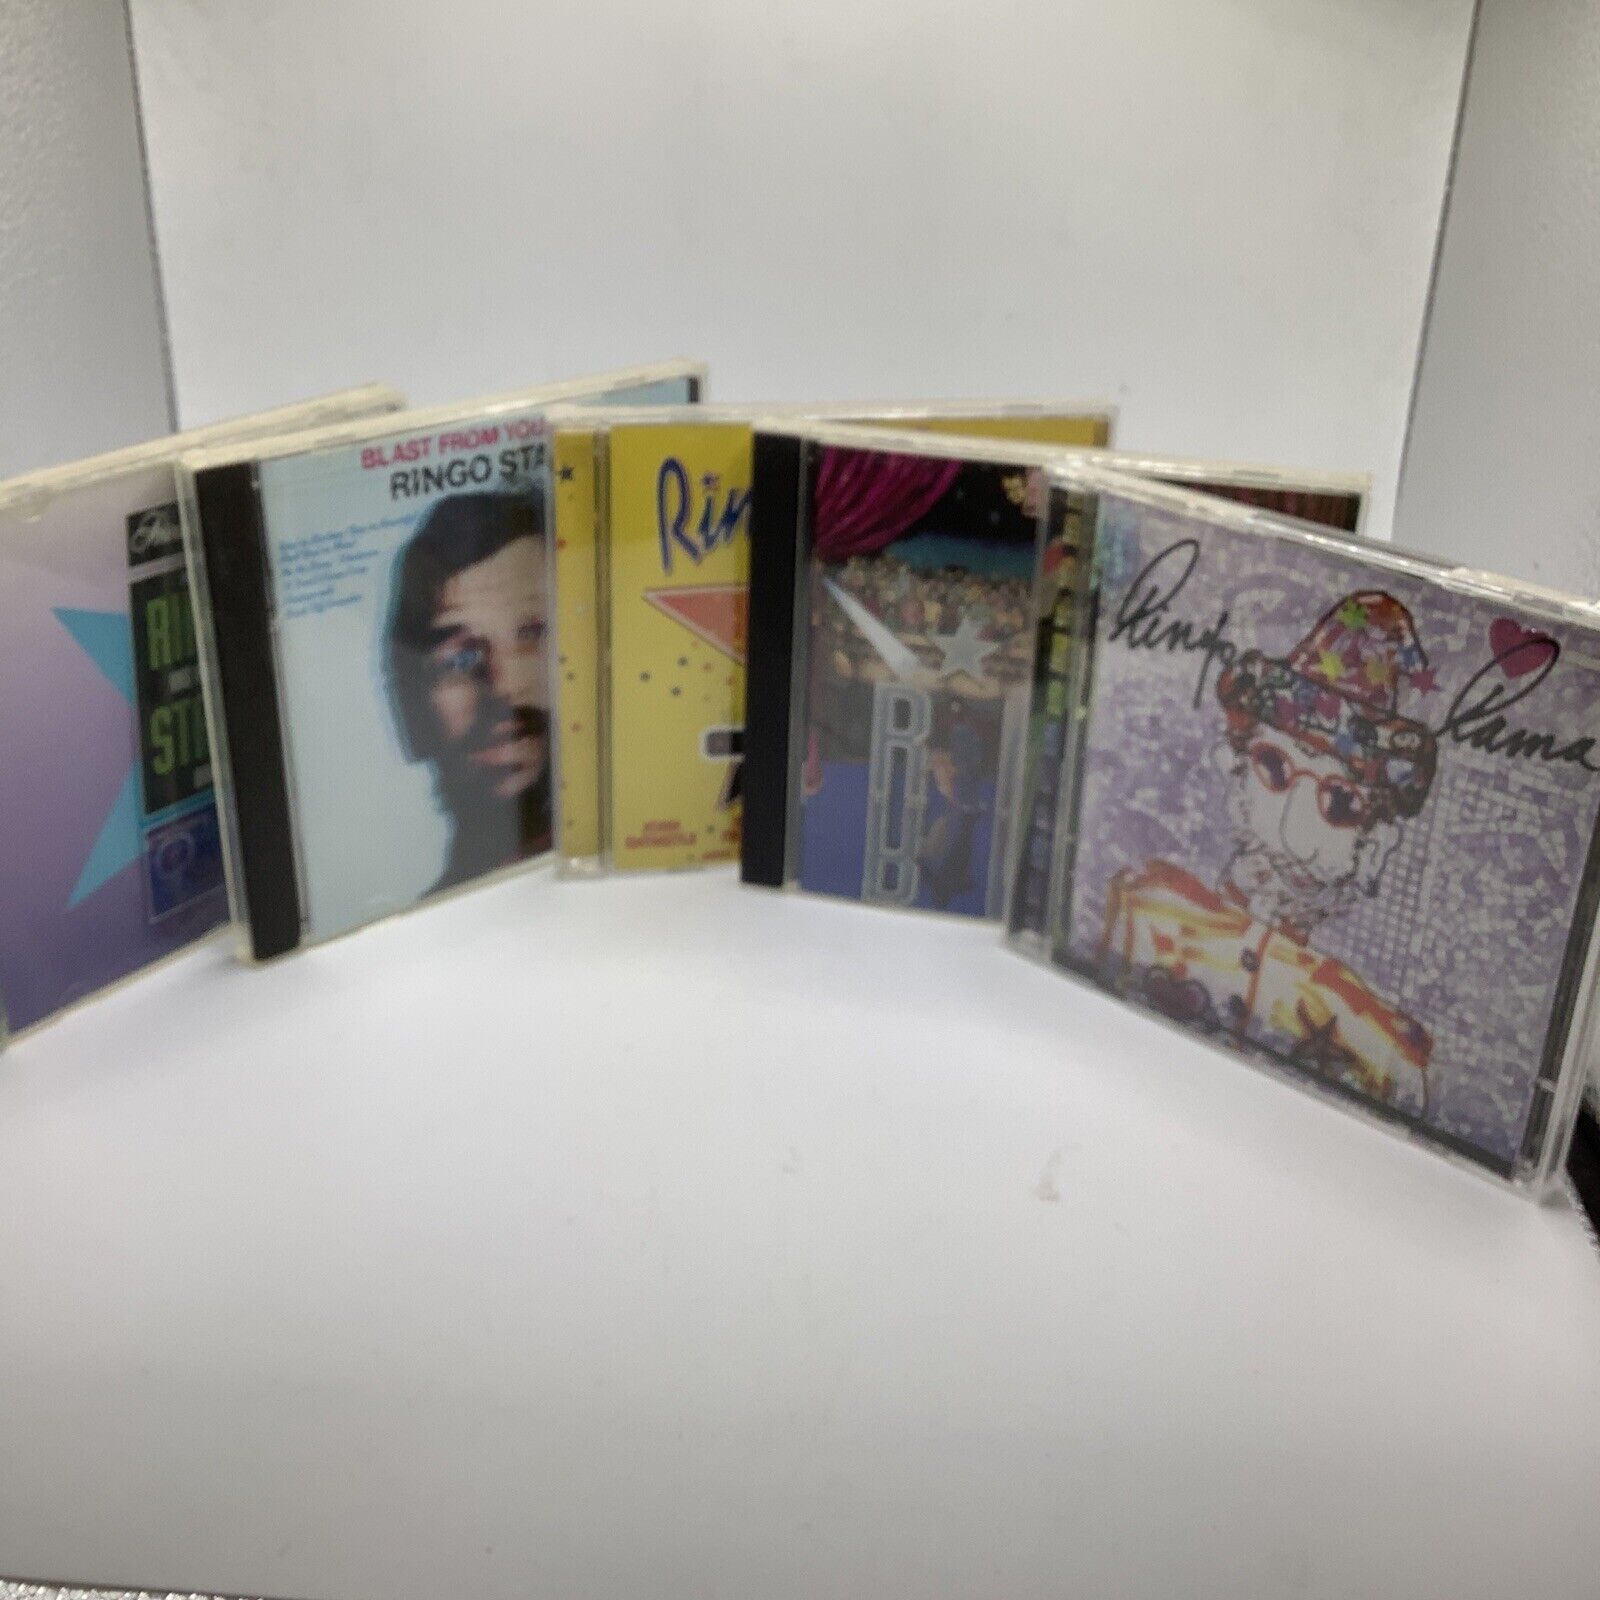 RINGO STARR (BEATLES) - 5 CD Lot Blast All Starr Band Private Issue Karma